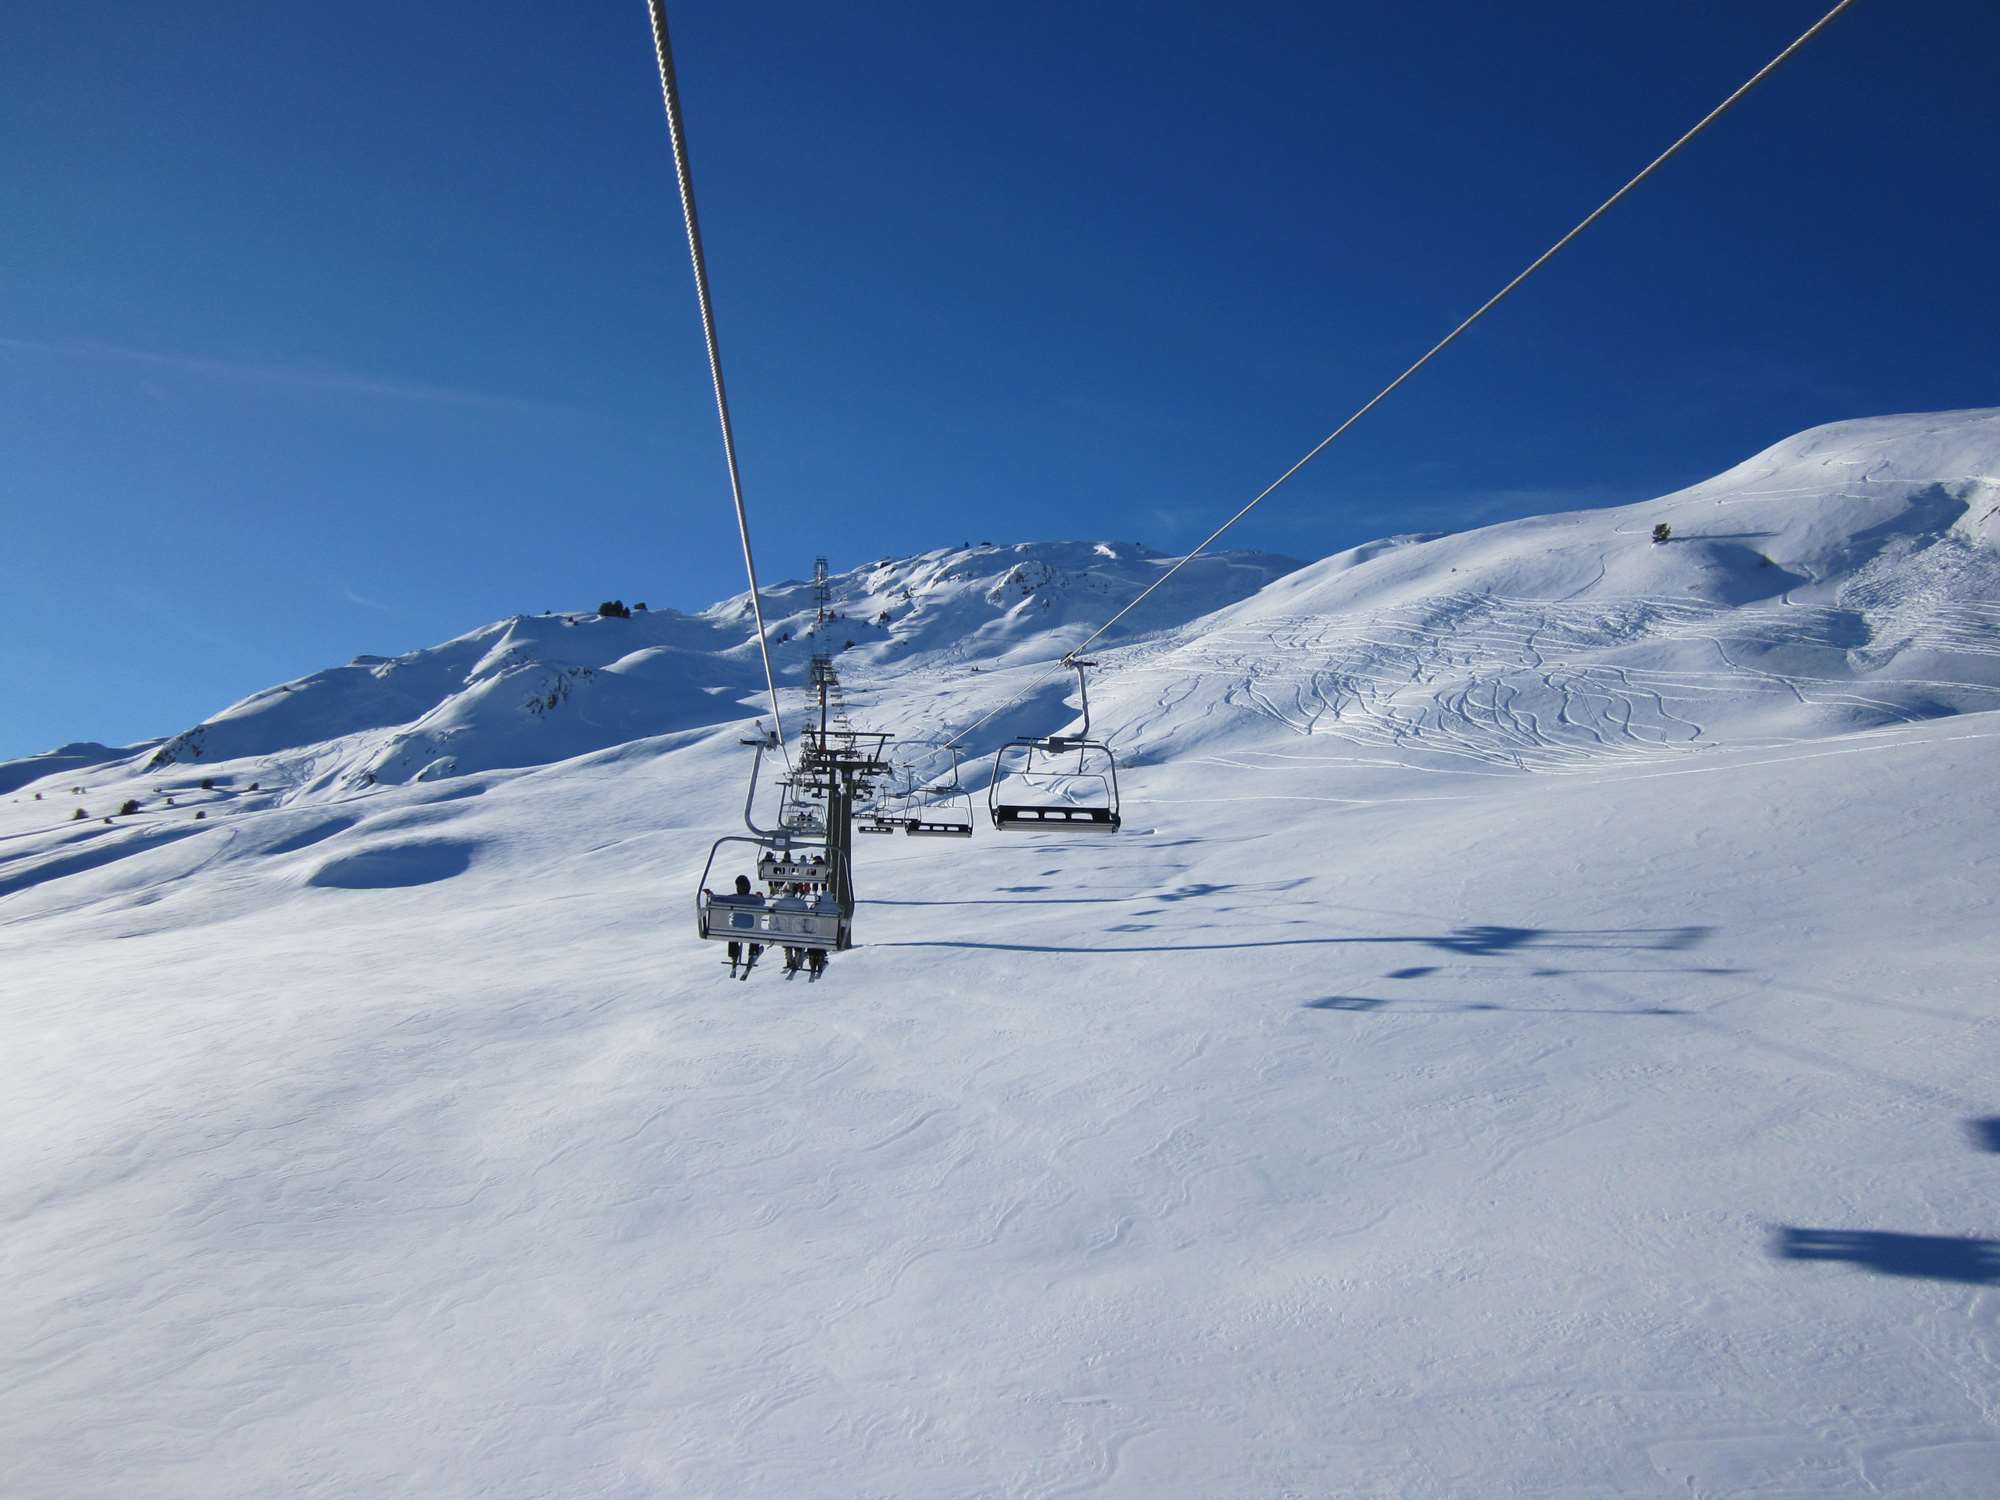 Chairlift in Baqueira